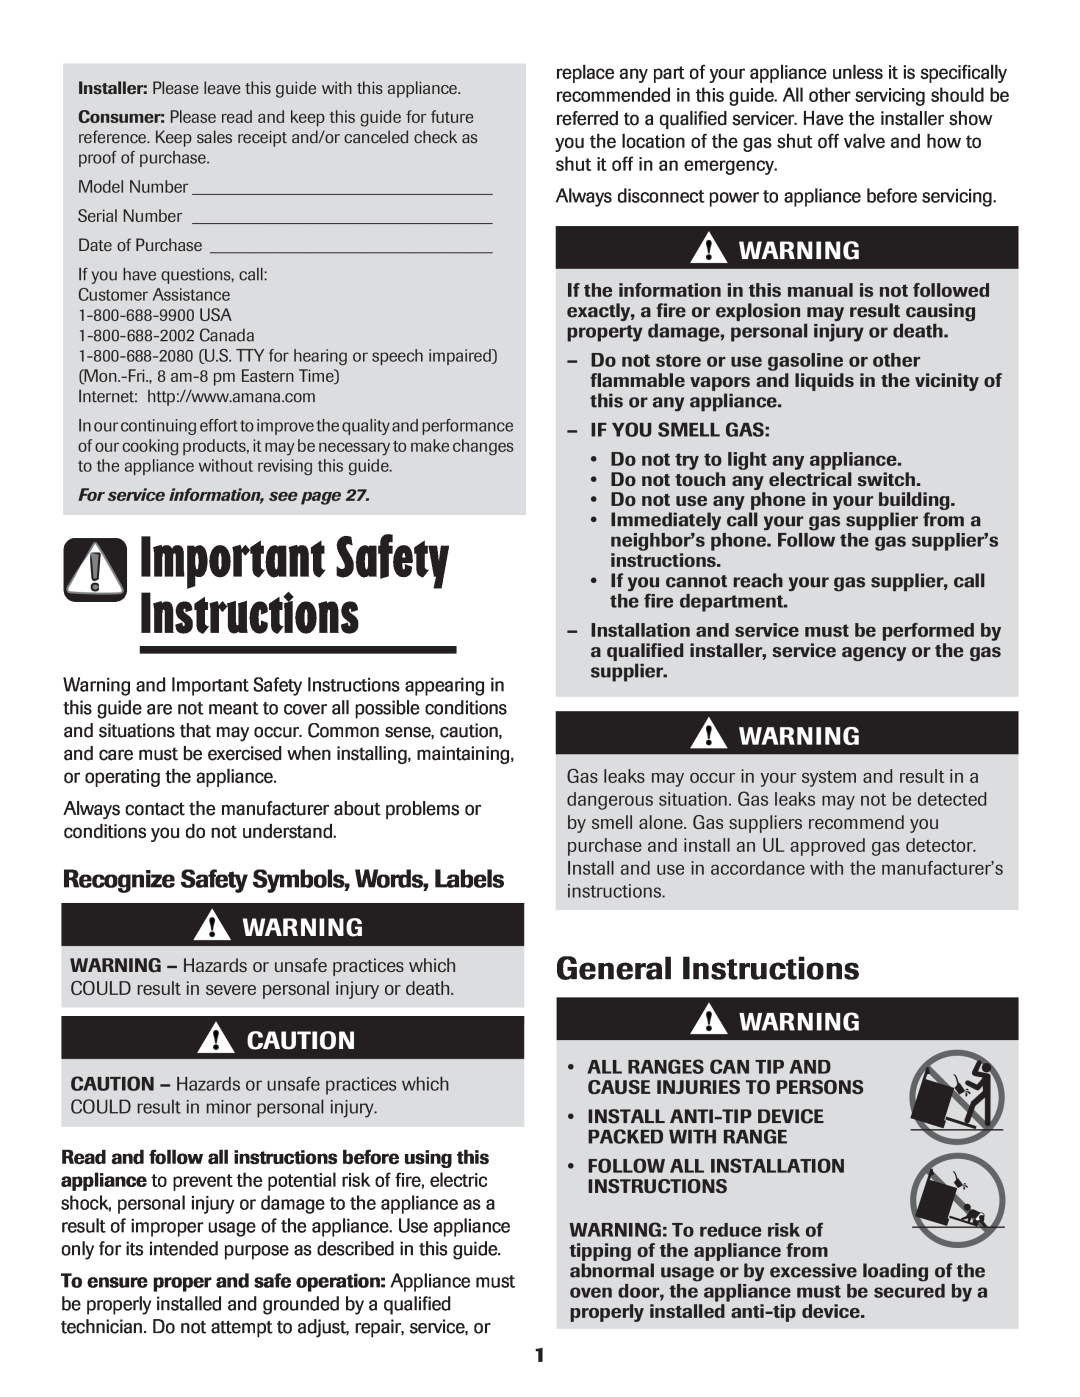 Amana pmn important safety instructions Important Safety, General Instructions, Recognize Safety Symbols, Words, Labels 